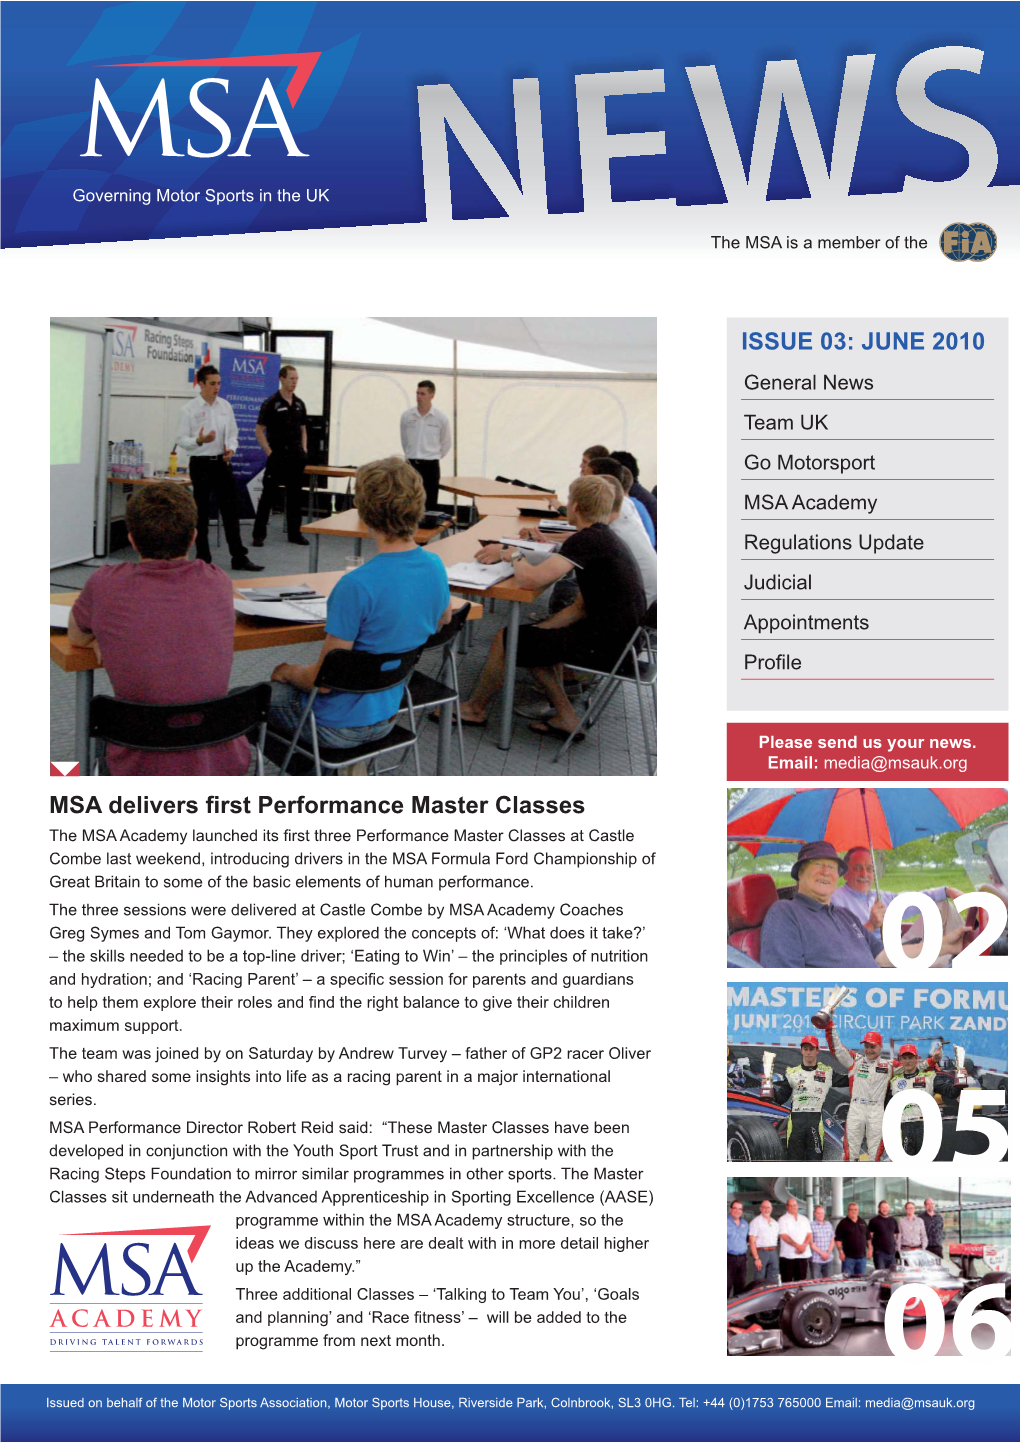 ISSUE 03: JUNE 2010 MSA Delivers First Performance Master Classes